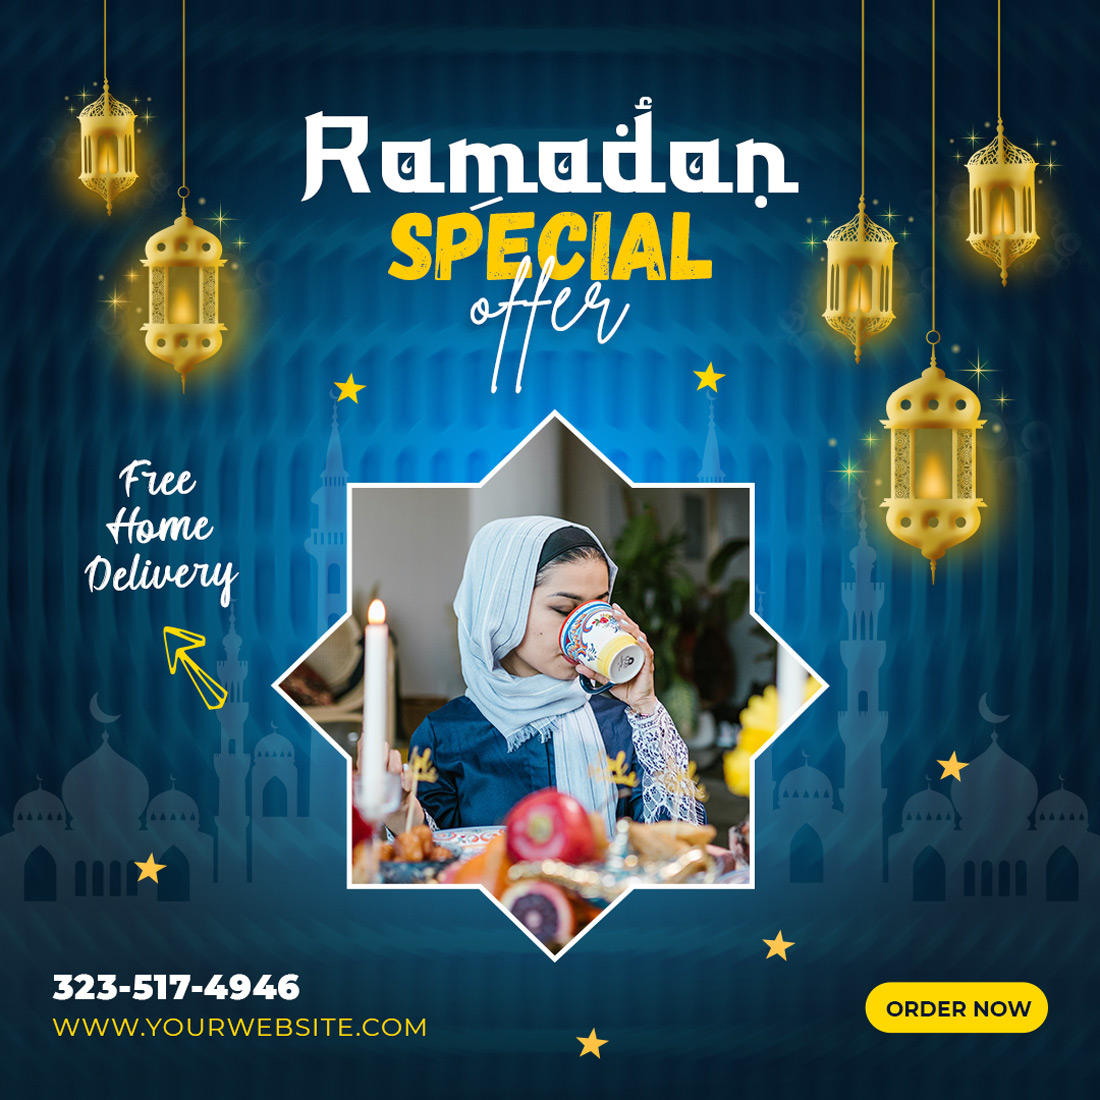 3 Beautiful Ramadan Kareem sale festival religious social media promotion banners- only $3 cover image.